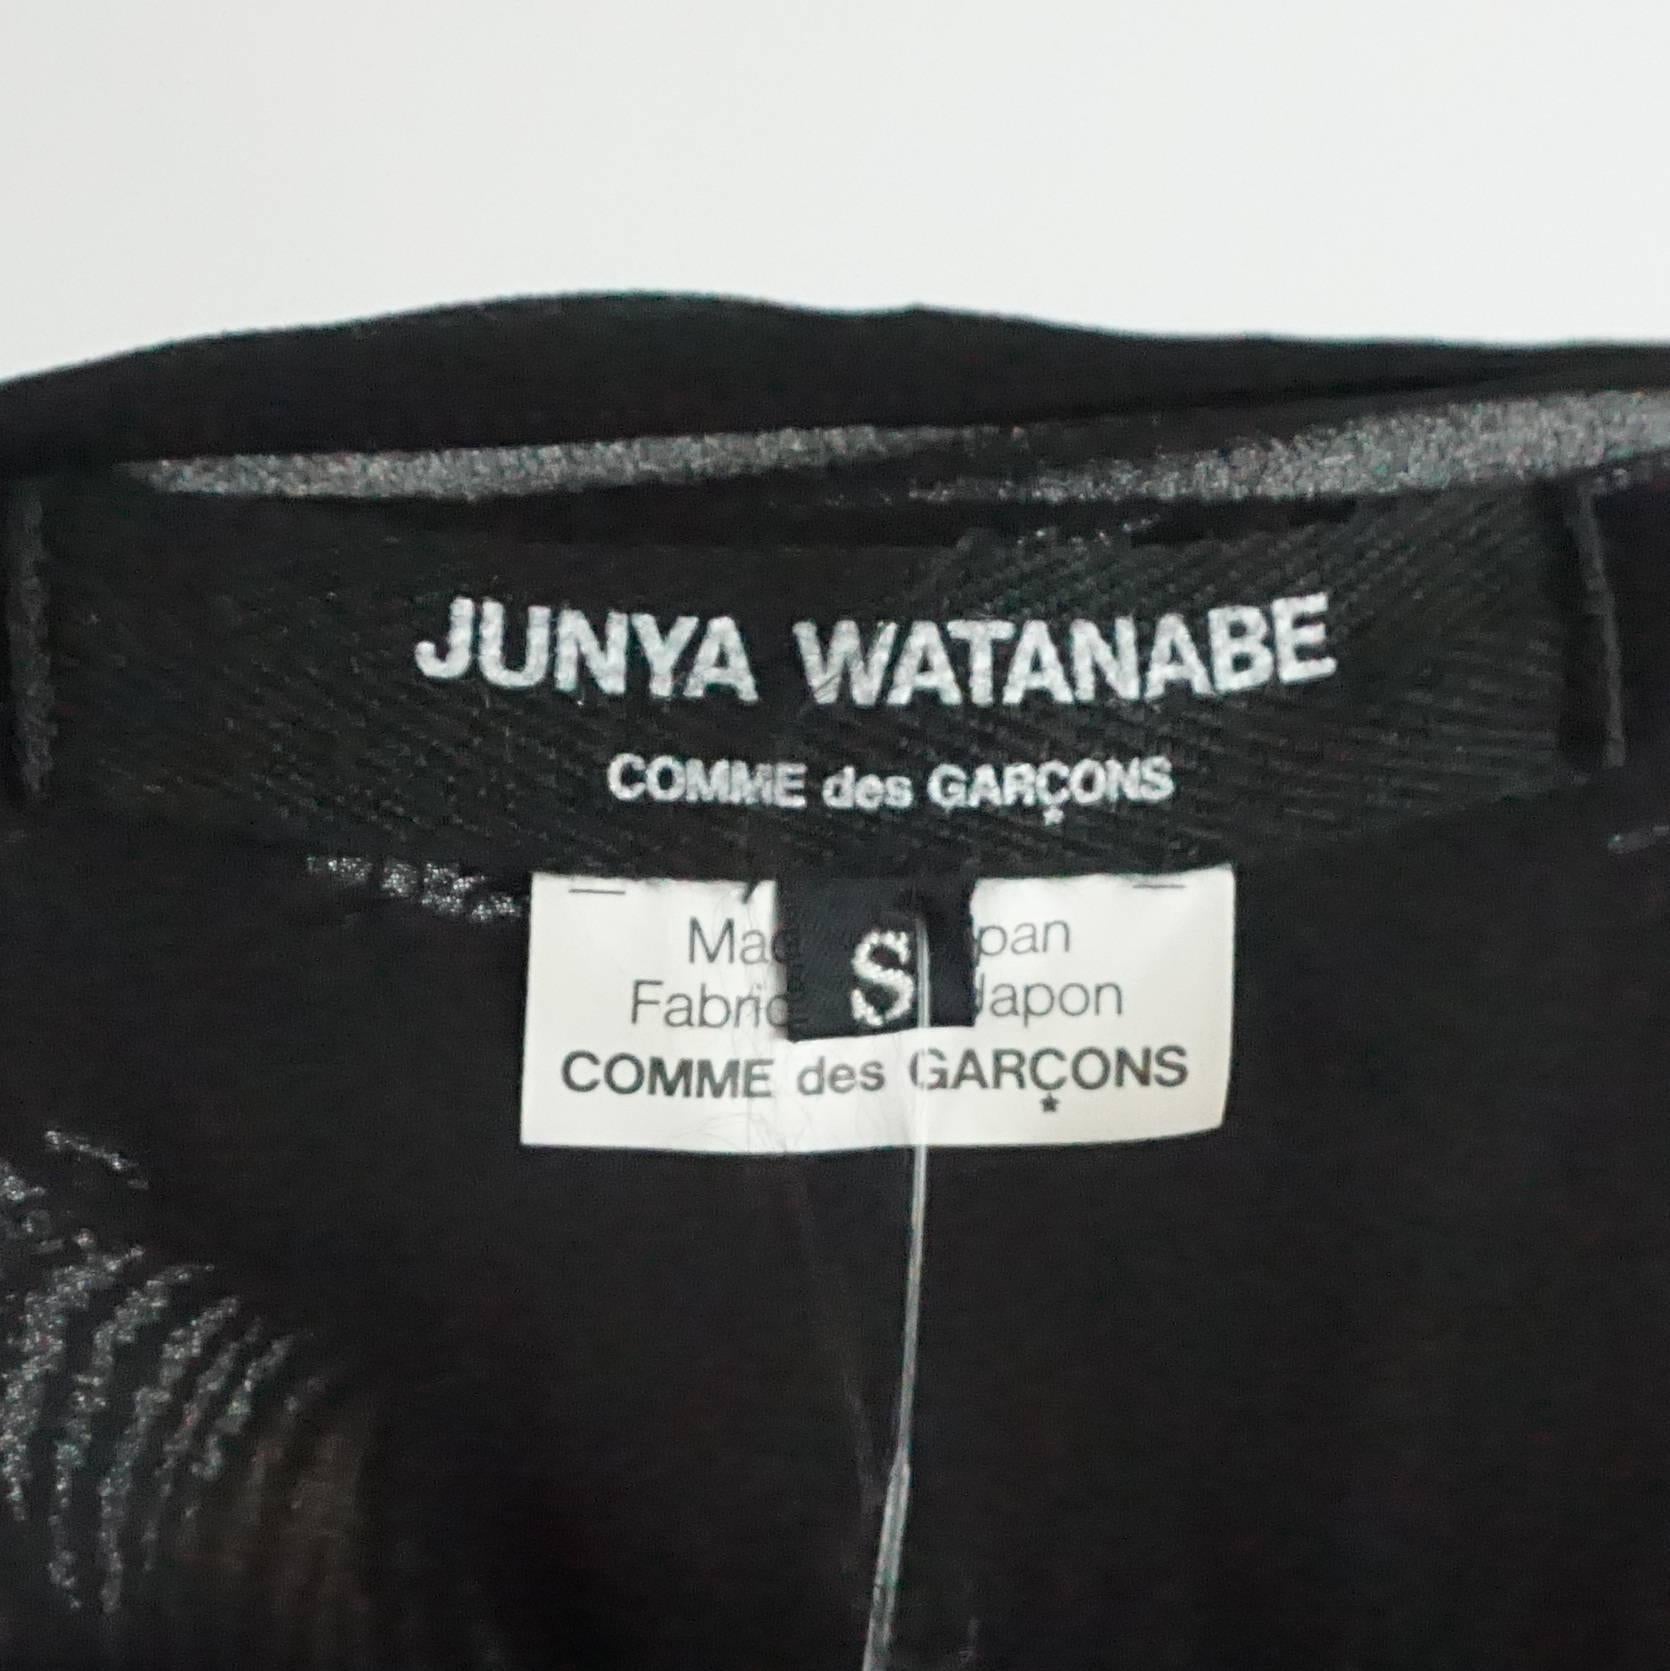 Junya Watanabe Comme des Garcons Blue and Black Lace Top - S In Excellent Condition For Sale In West Palm Beach, FL